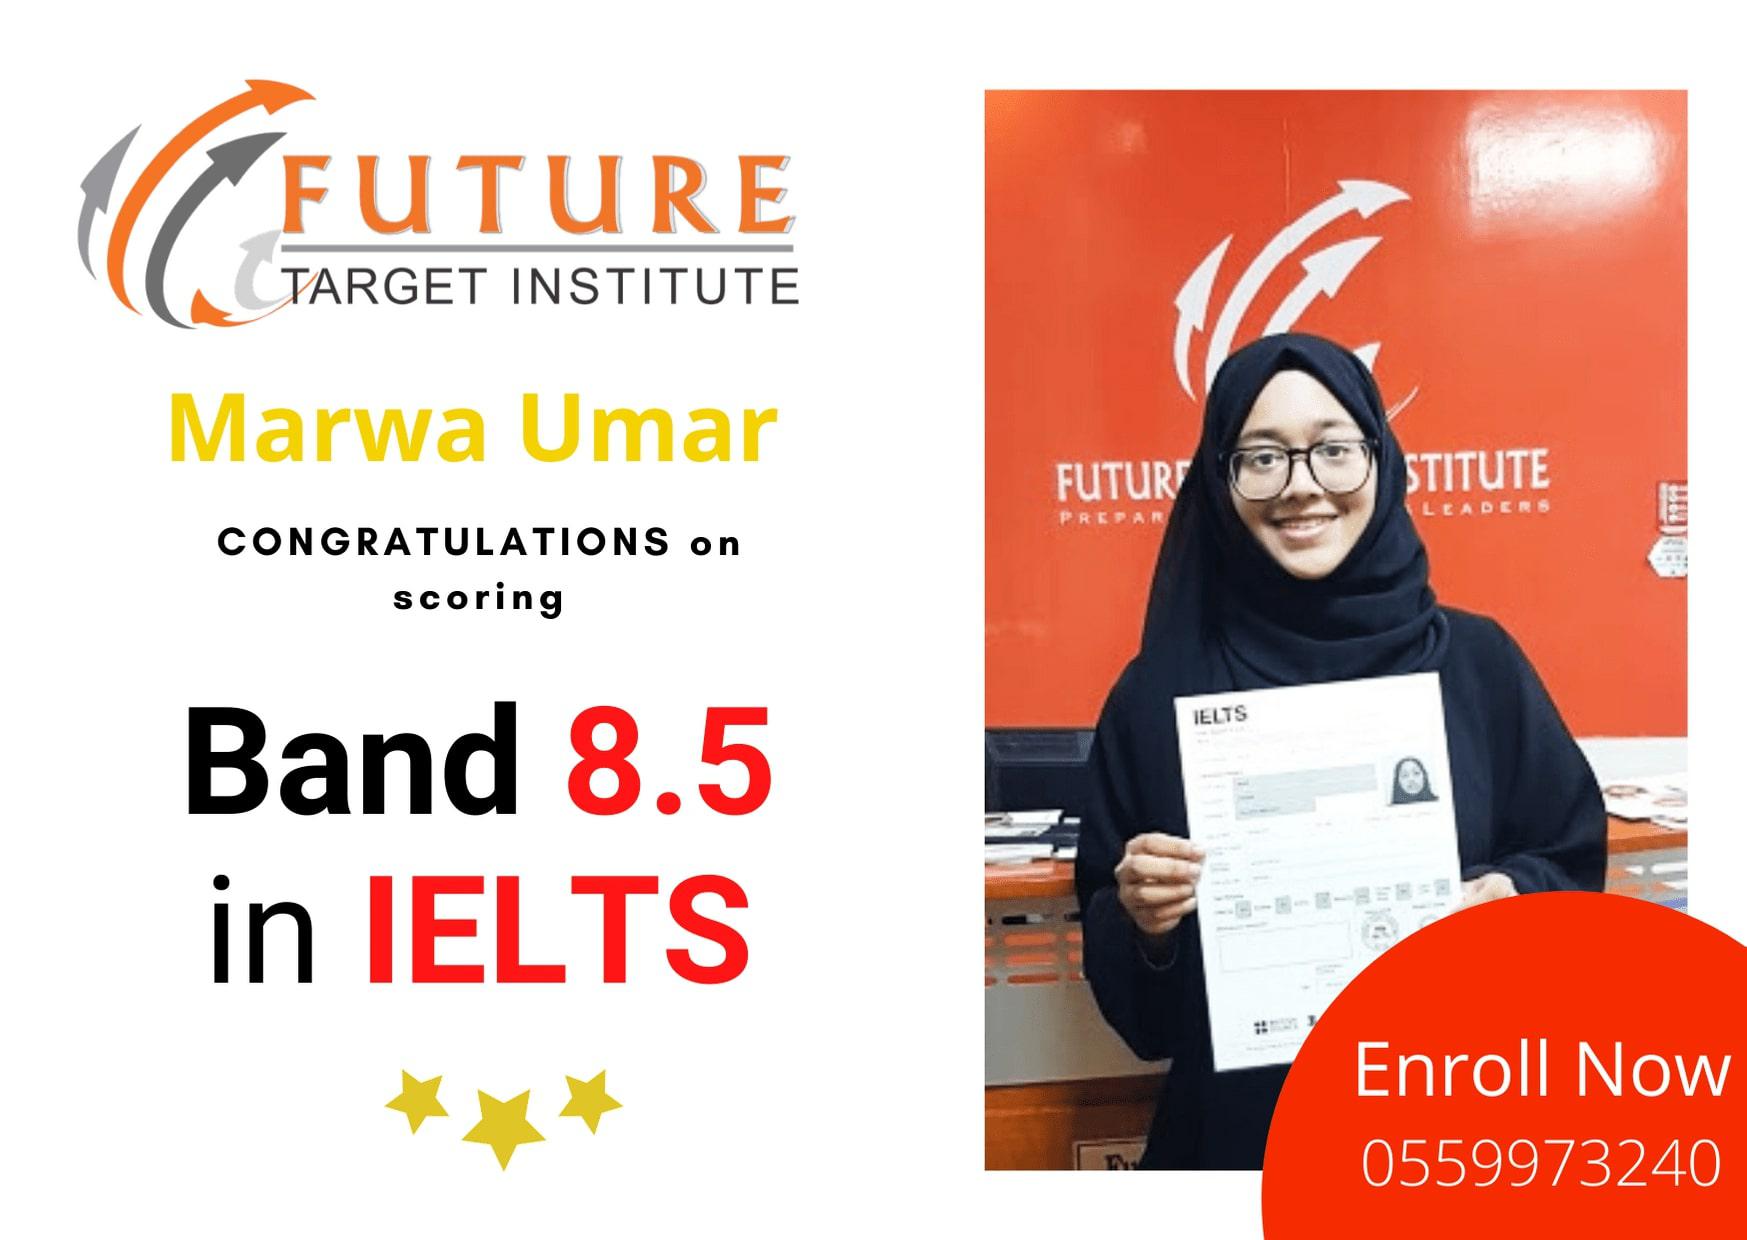 The entrance of Future Target Institute, which is the best place for giving the IELTS Exam UAE and getting a high band score without hassle.